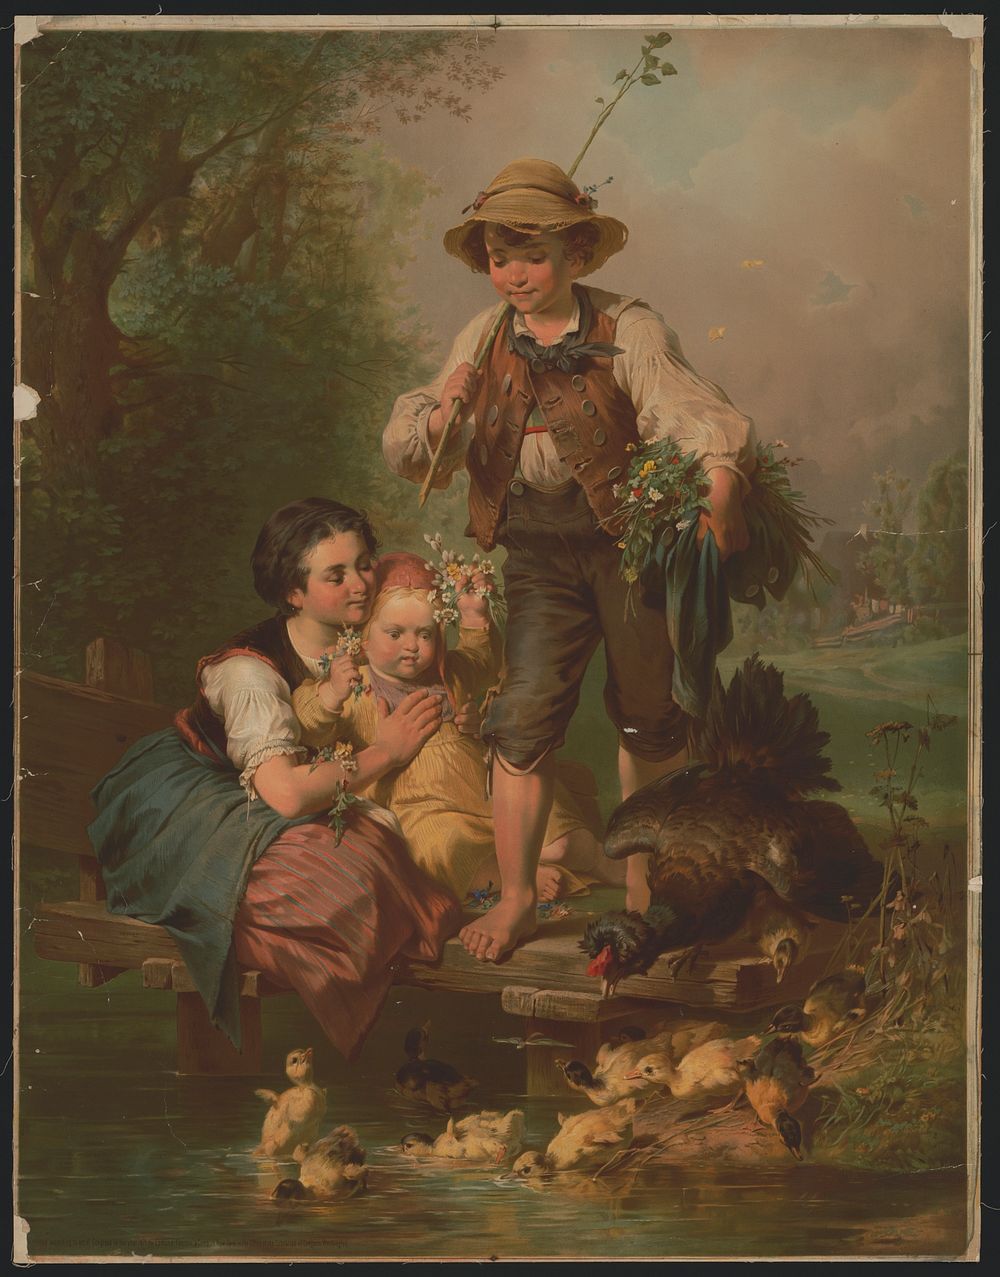 [German boy and girls with flowers watching ducklings]